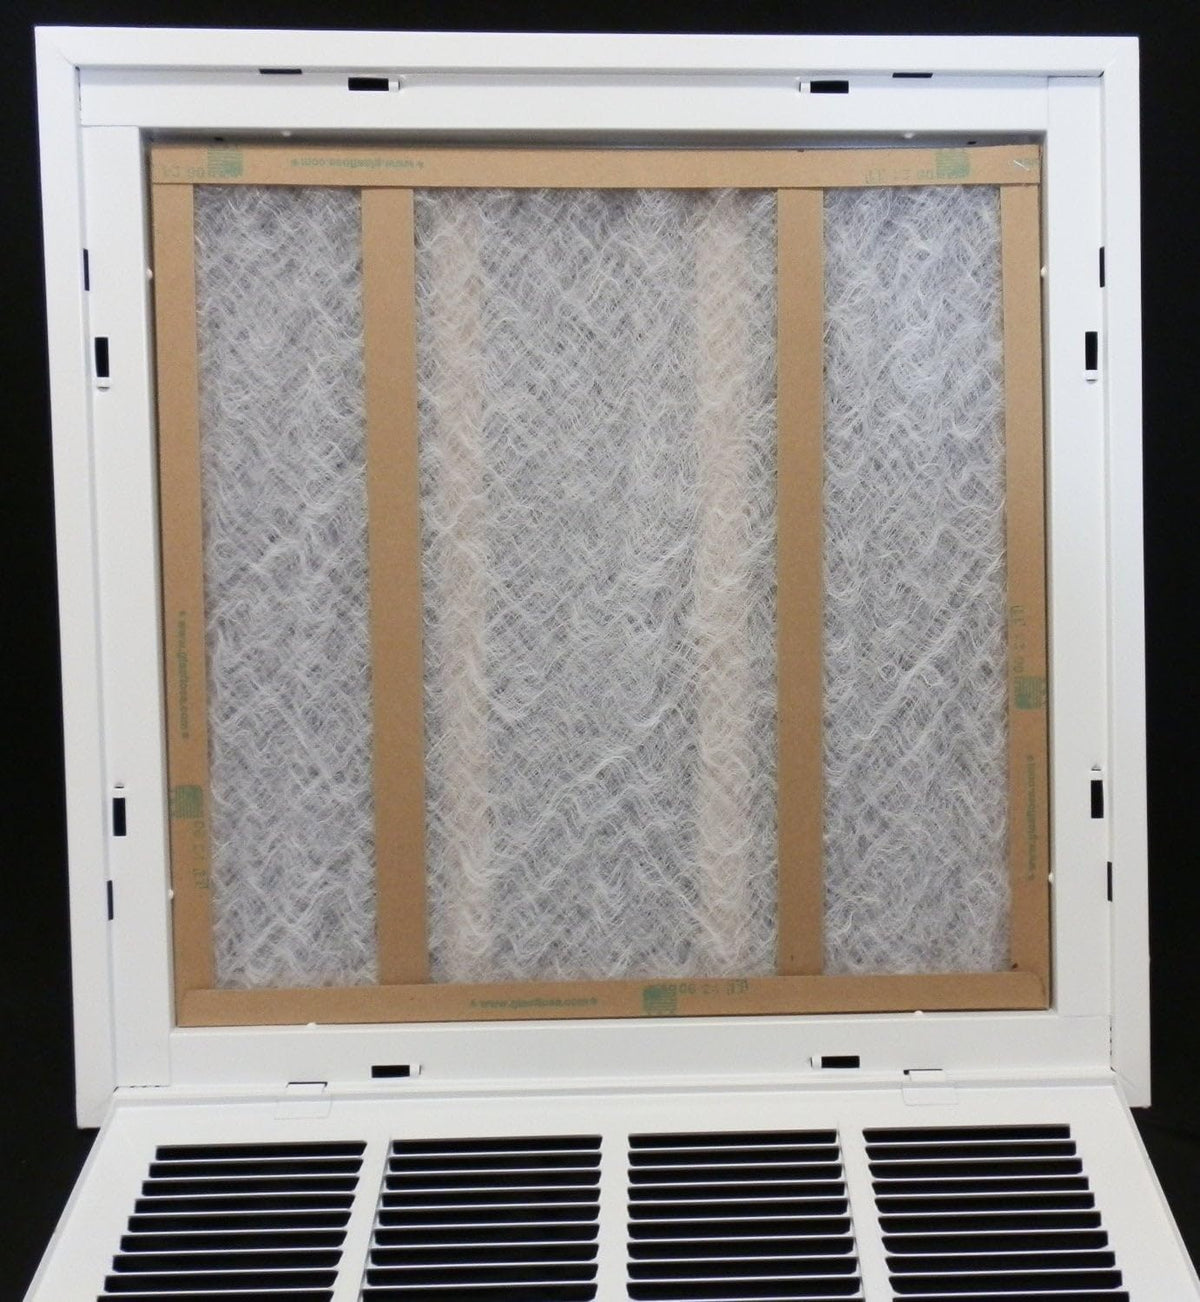 24&quot; X 16&quot; Steel Return Air Filter Grille for 1&quot; Filter - Fixed Hinged - [Outer Dimensions: 26 5/8&quot; X 18 5/8&quot;]